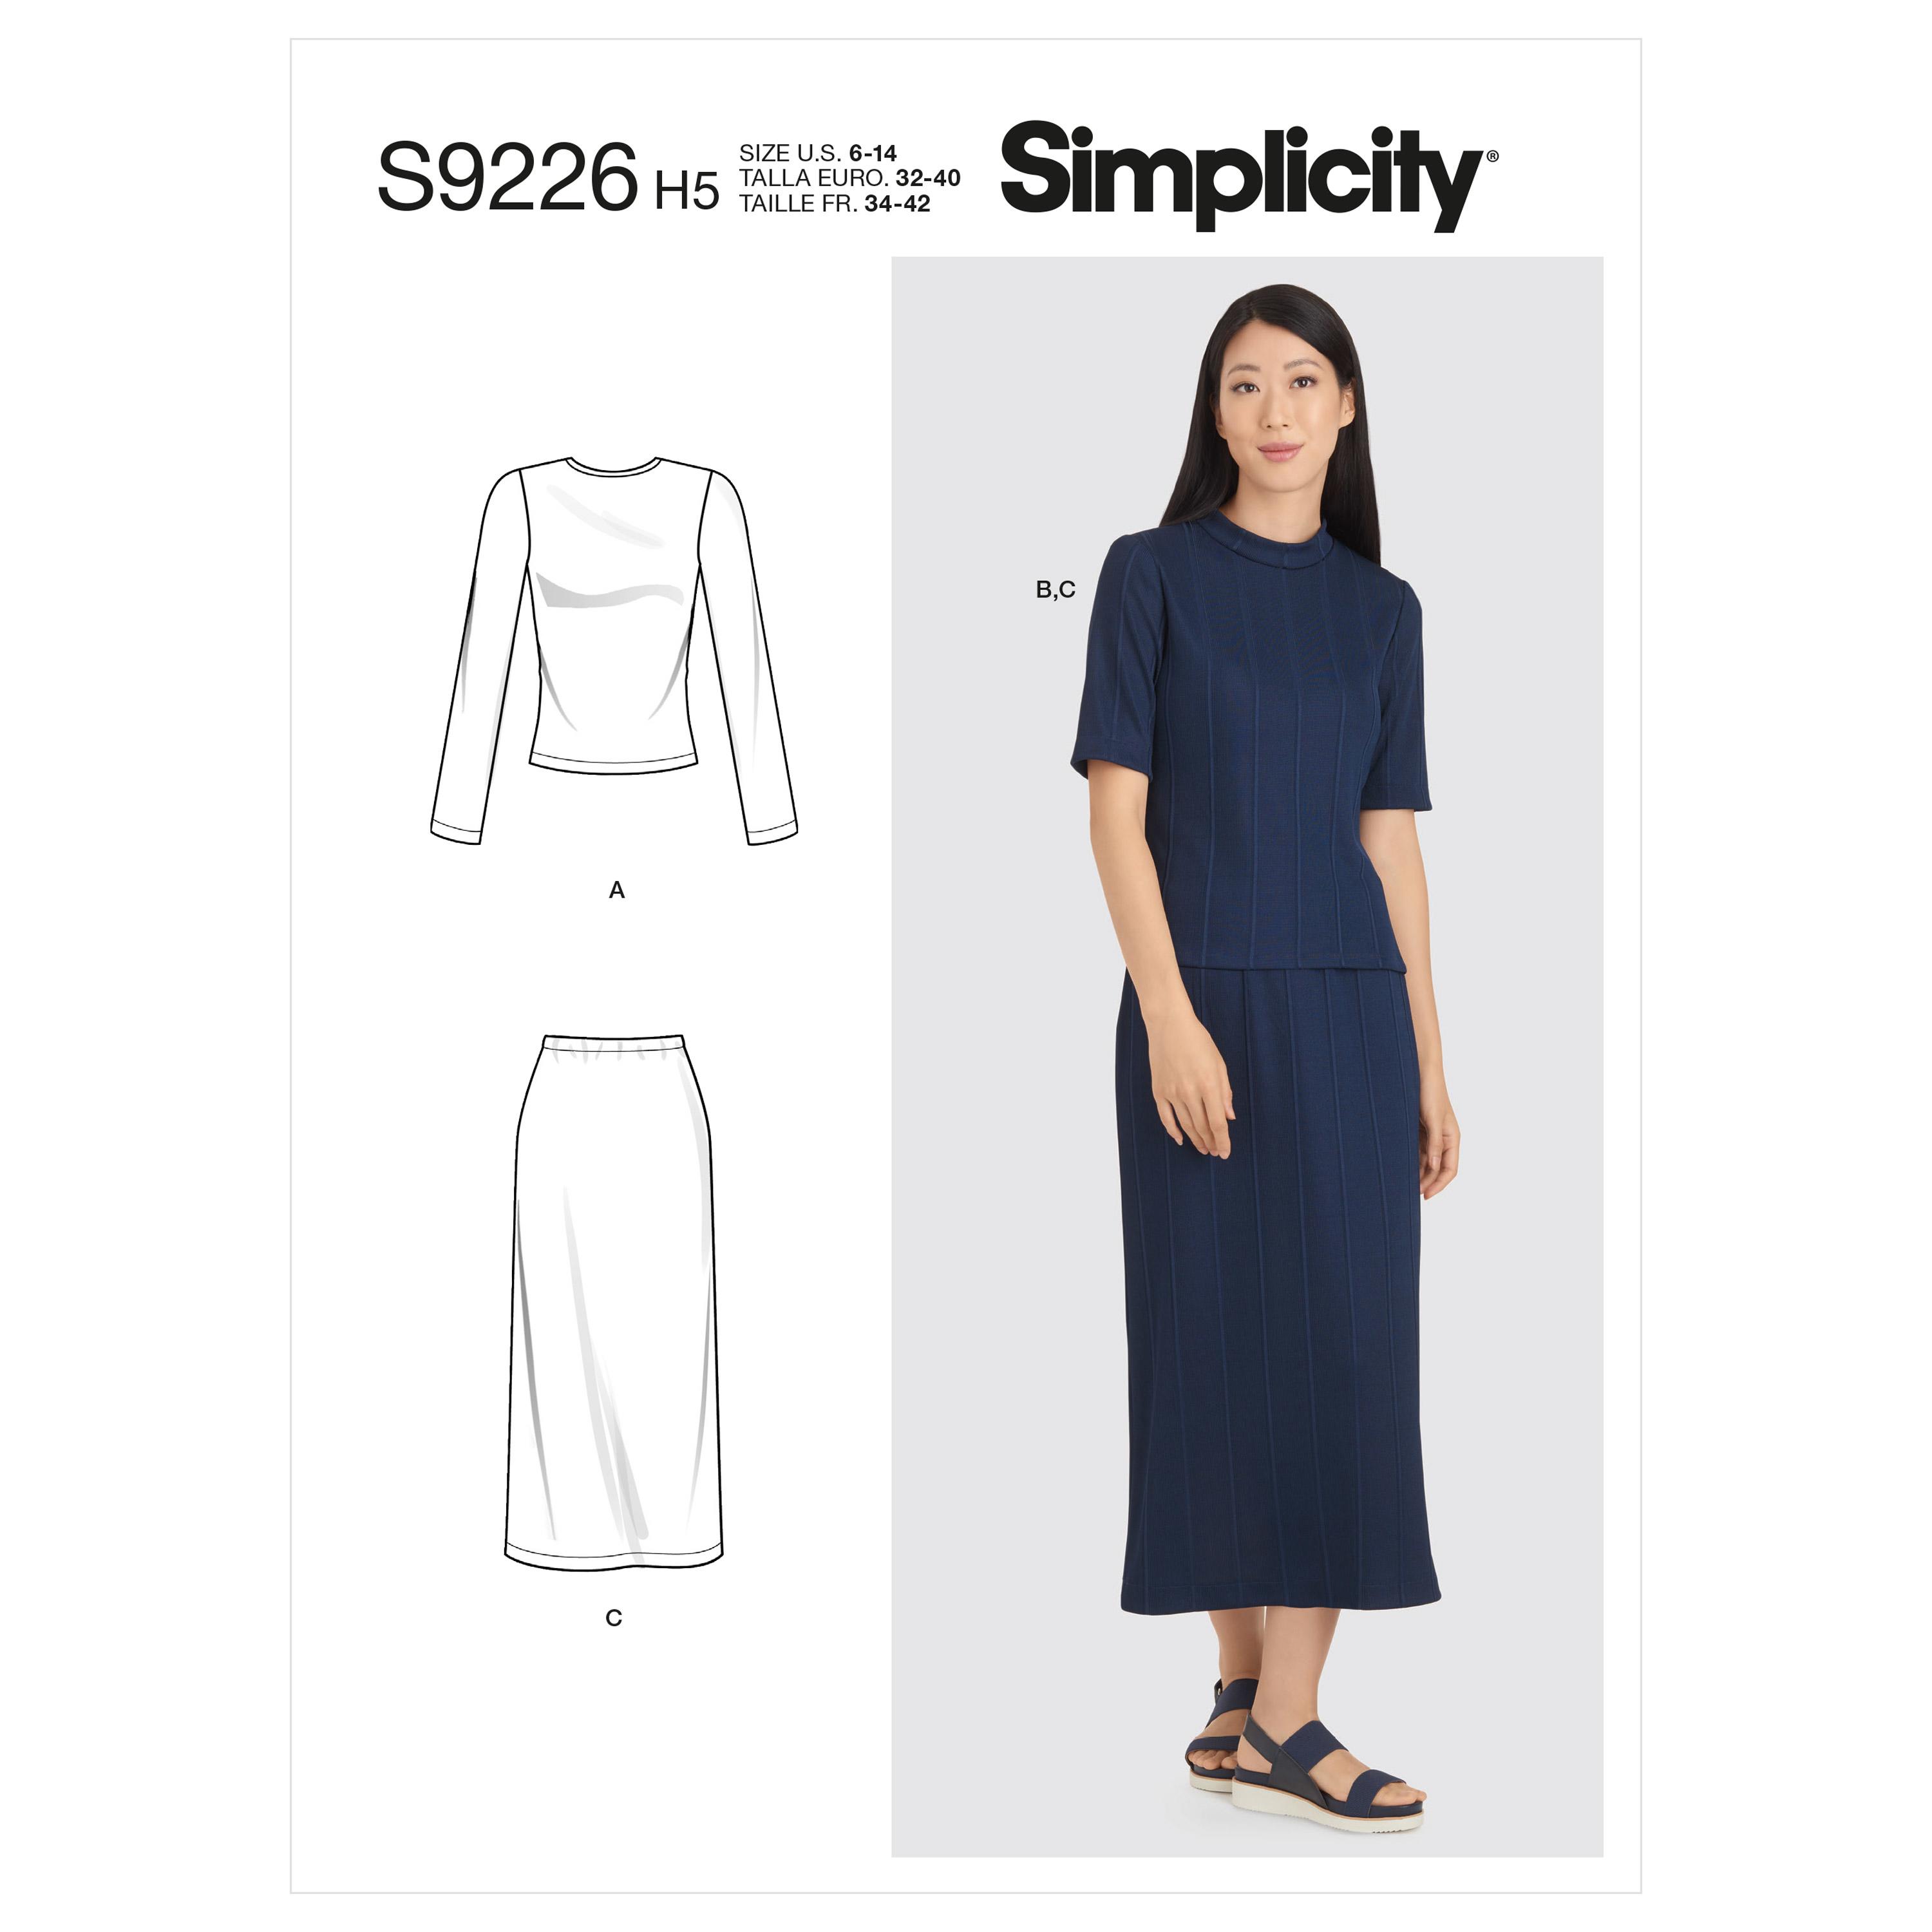 Simplicity Sewing Pattern S9226 Misses' Knit Tops & Skirt